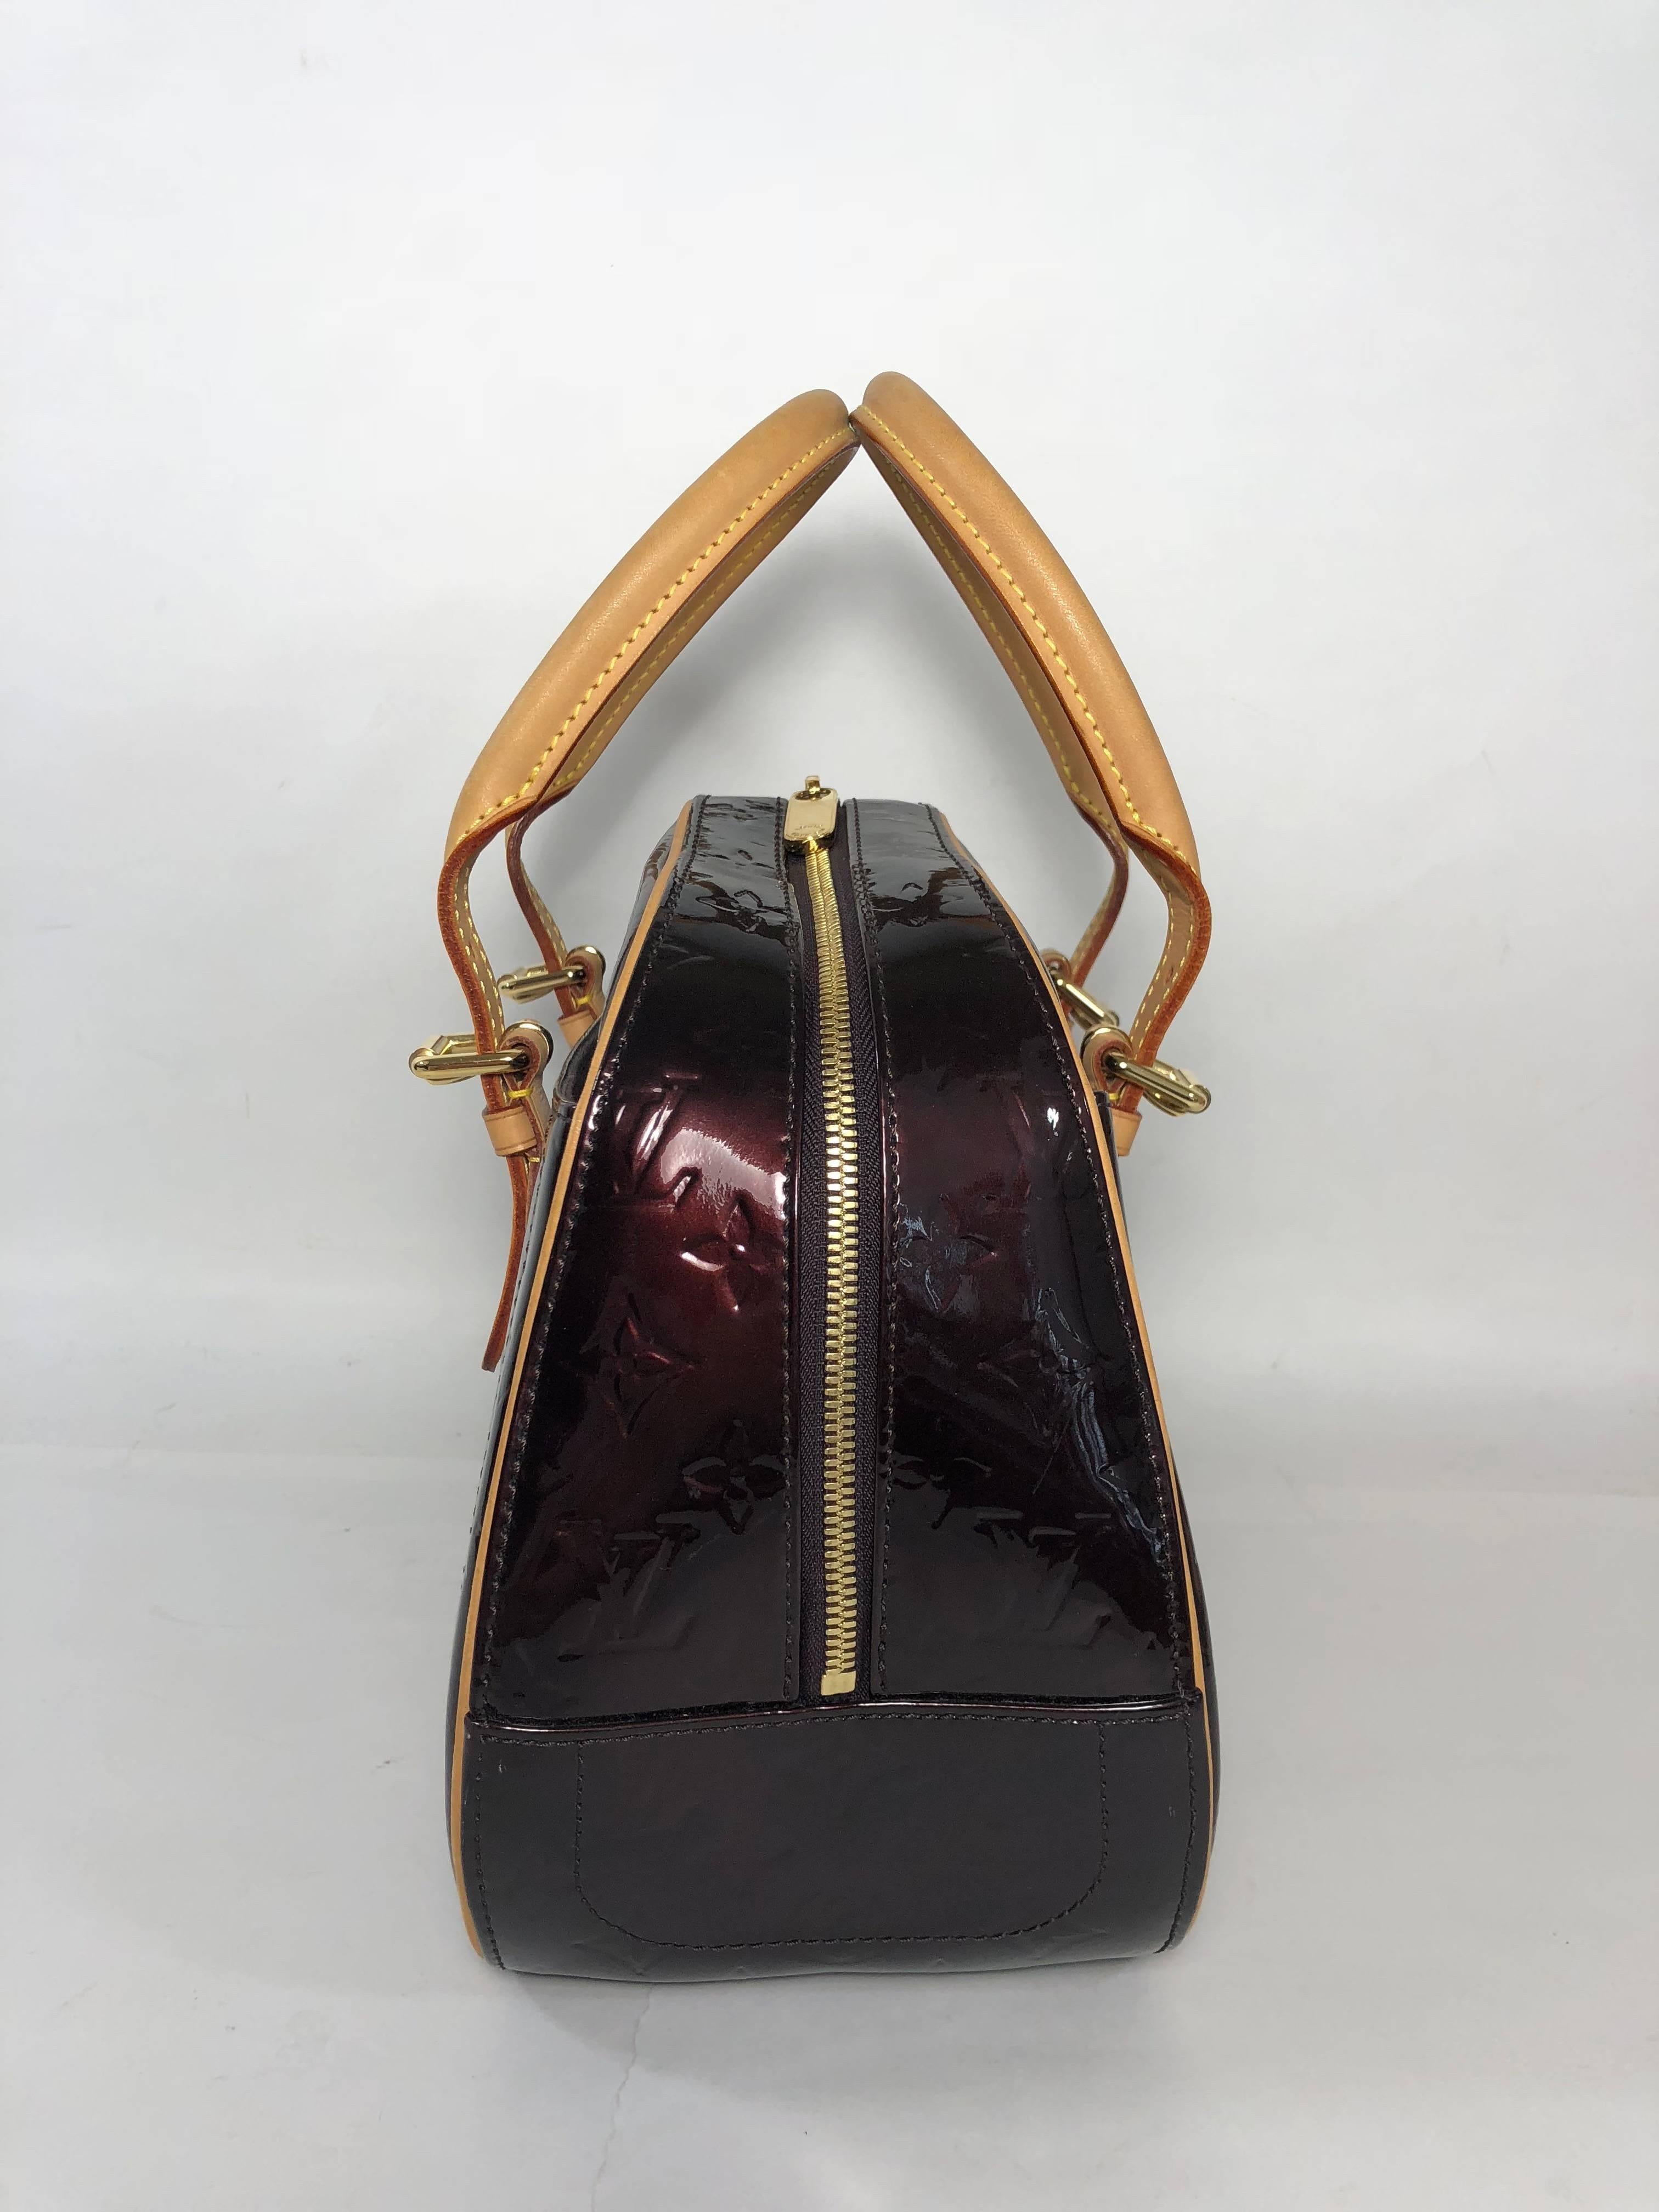 Louis Vuitton Vernis Summit Drive in Amarante In Excellent Condition For Sale In Saint Charles, IL